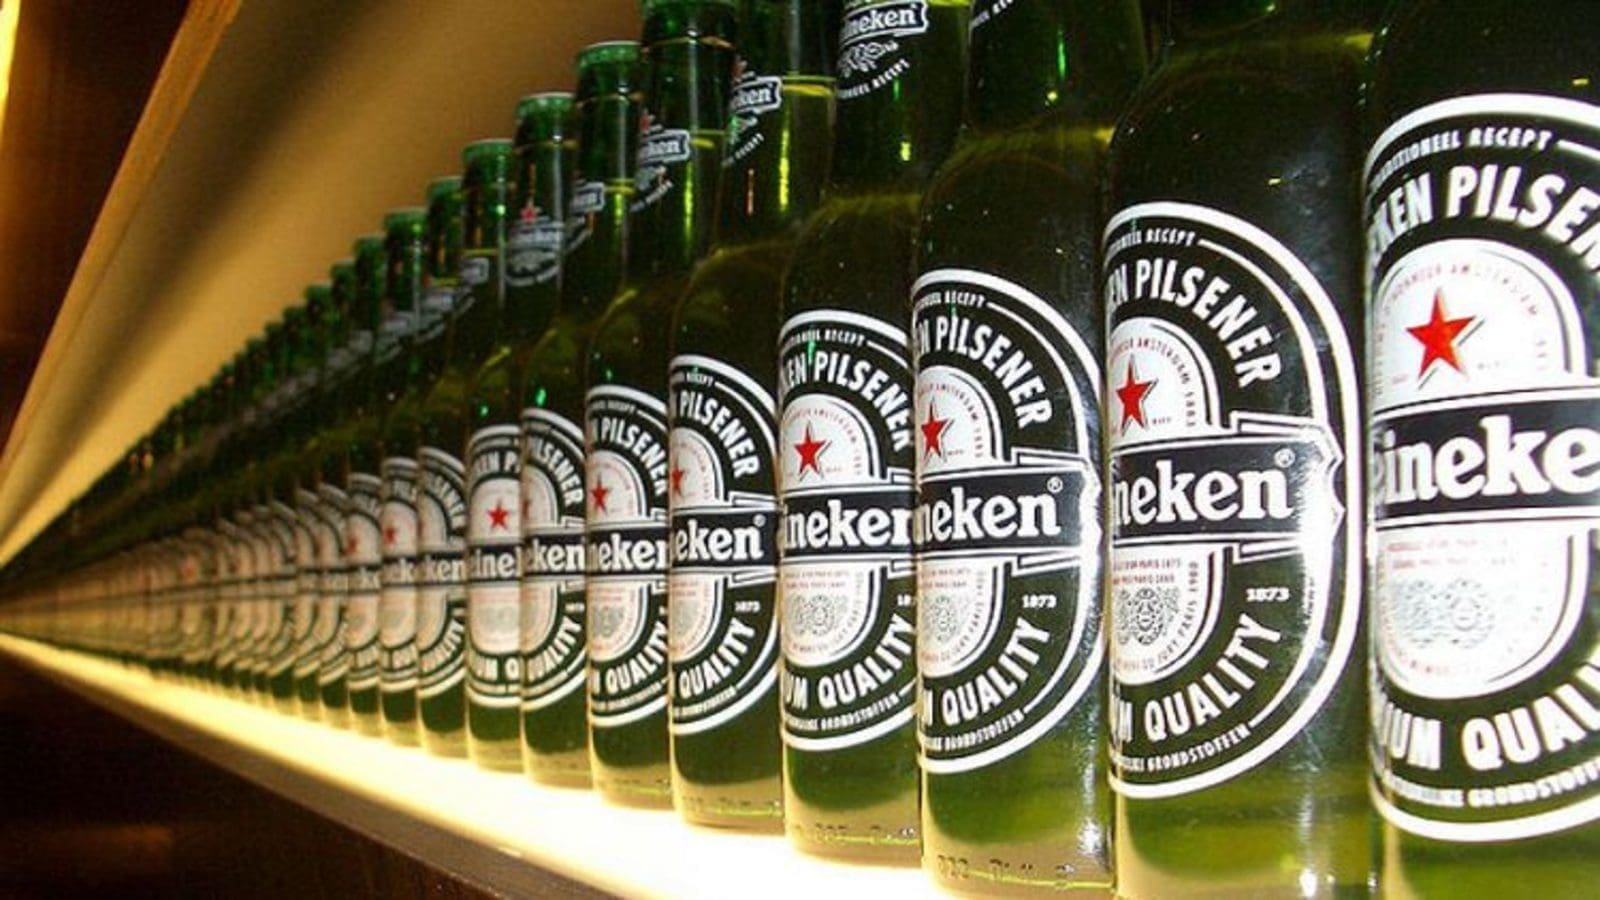 FEMSA parts with full shareholding in Heineken to focus on core business verticals